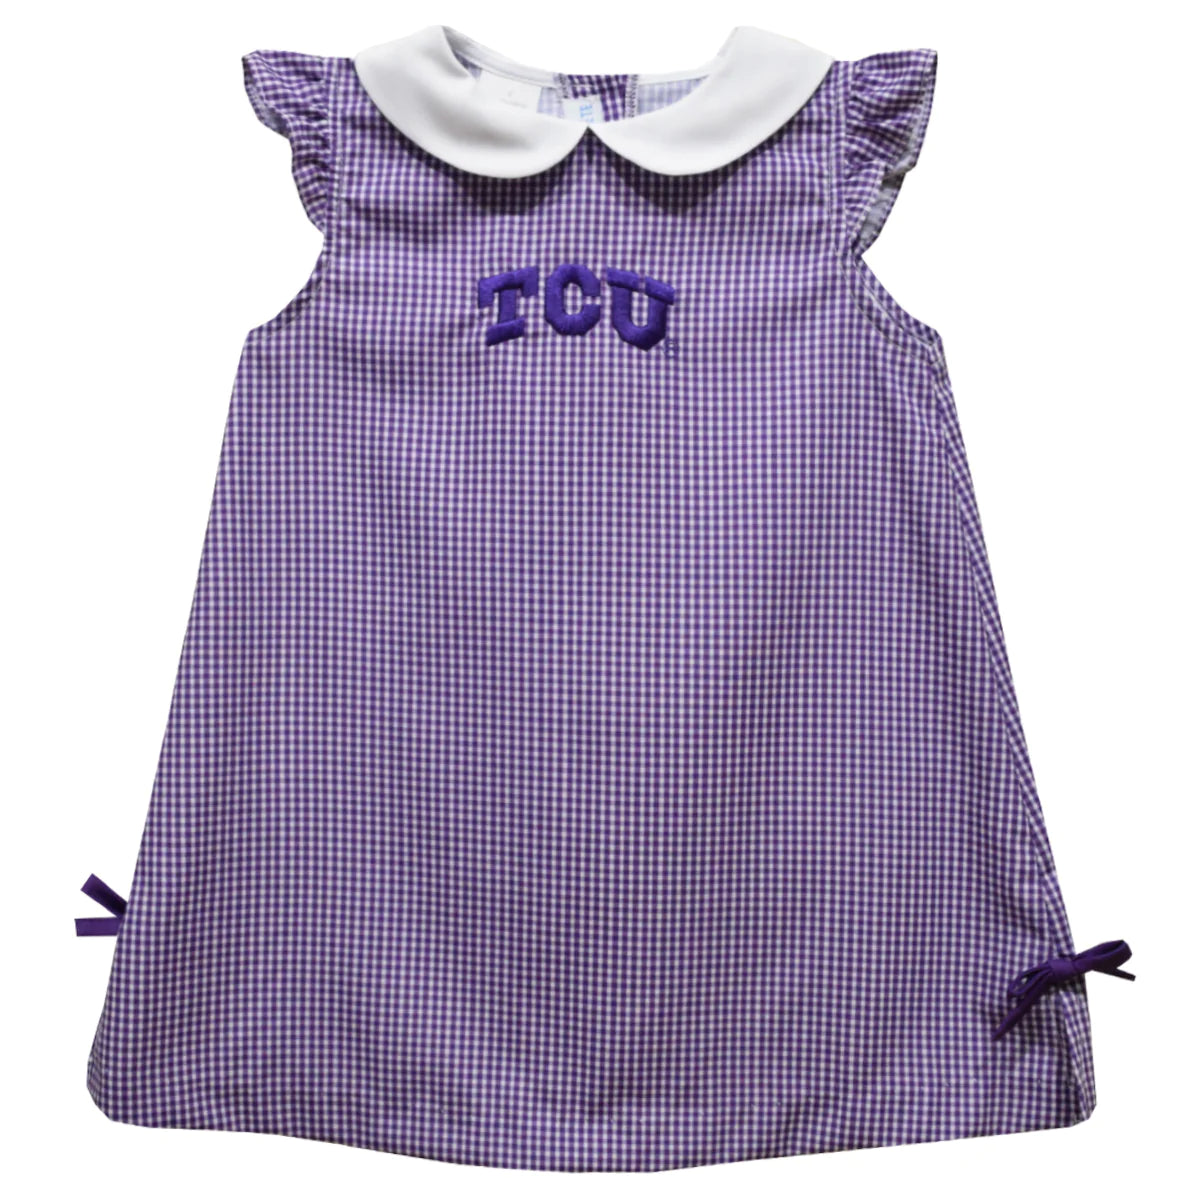 TCU Horned Frogs Embroidered Purple Gingham Dress